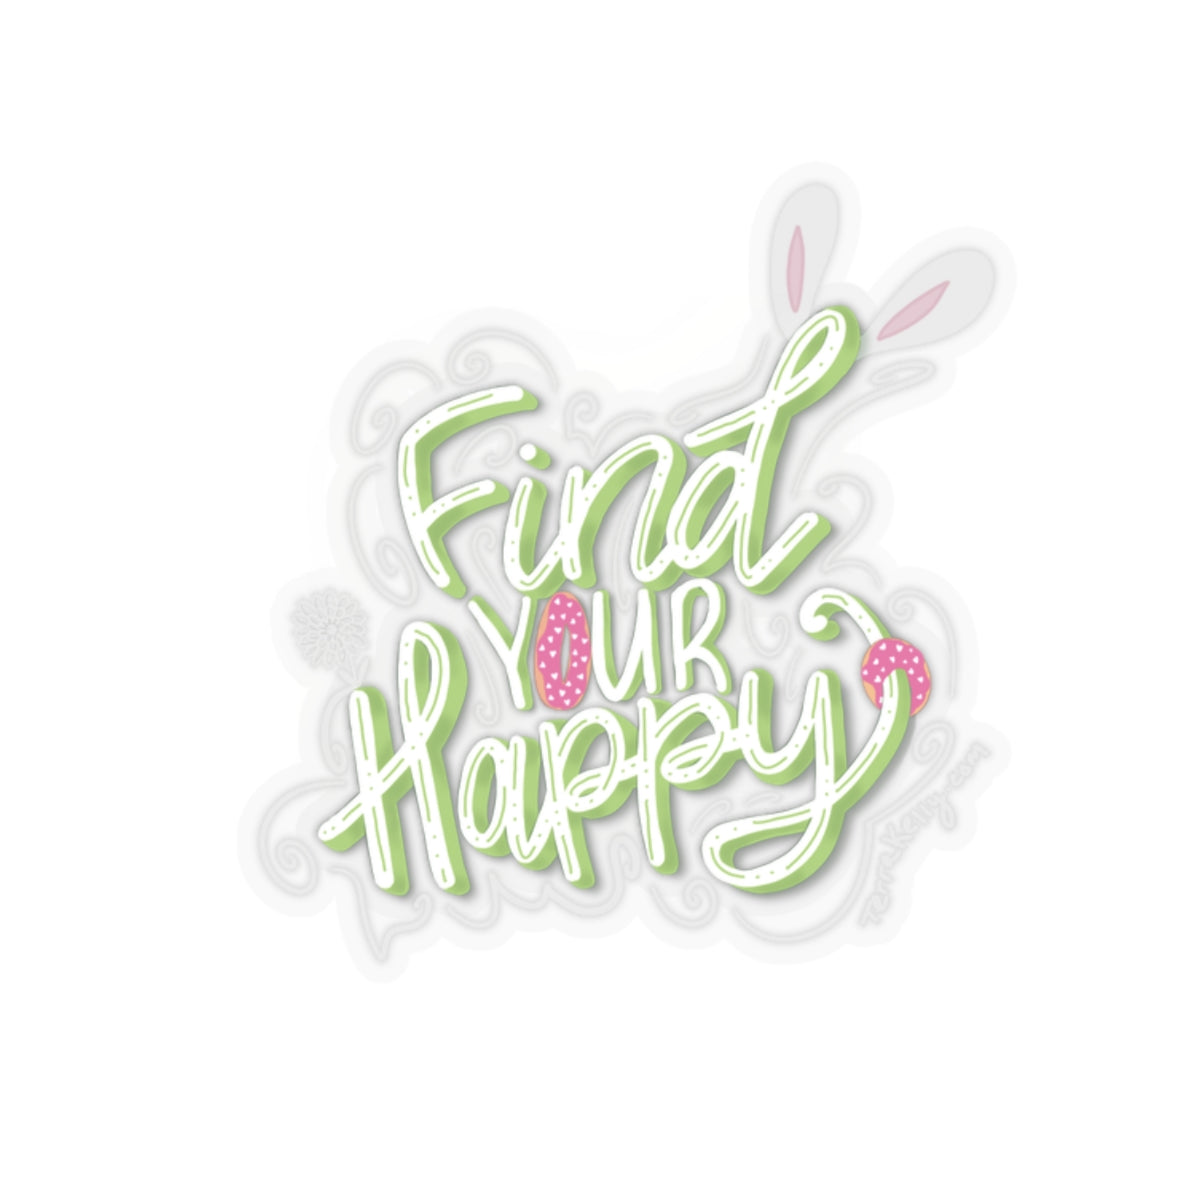 Find Your Happy Kiss-Cut Stickers | Computer Sticker | Transparent Sticker | FREE SHIPPING